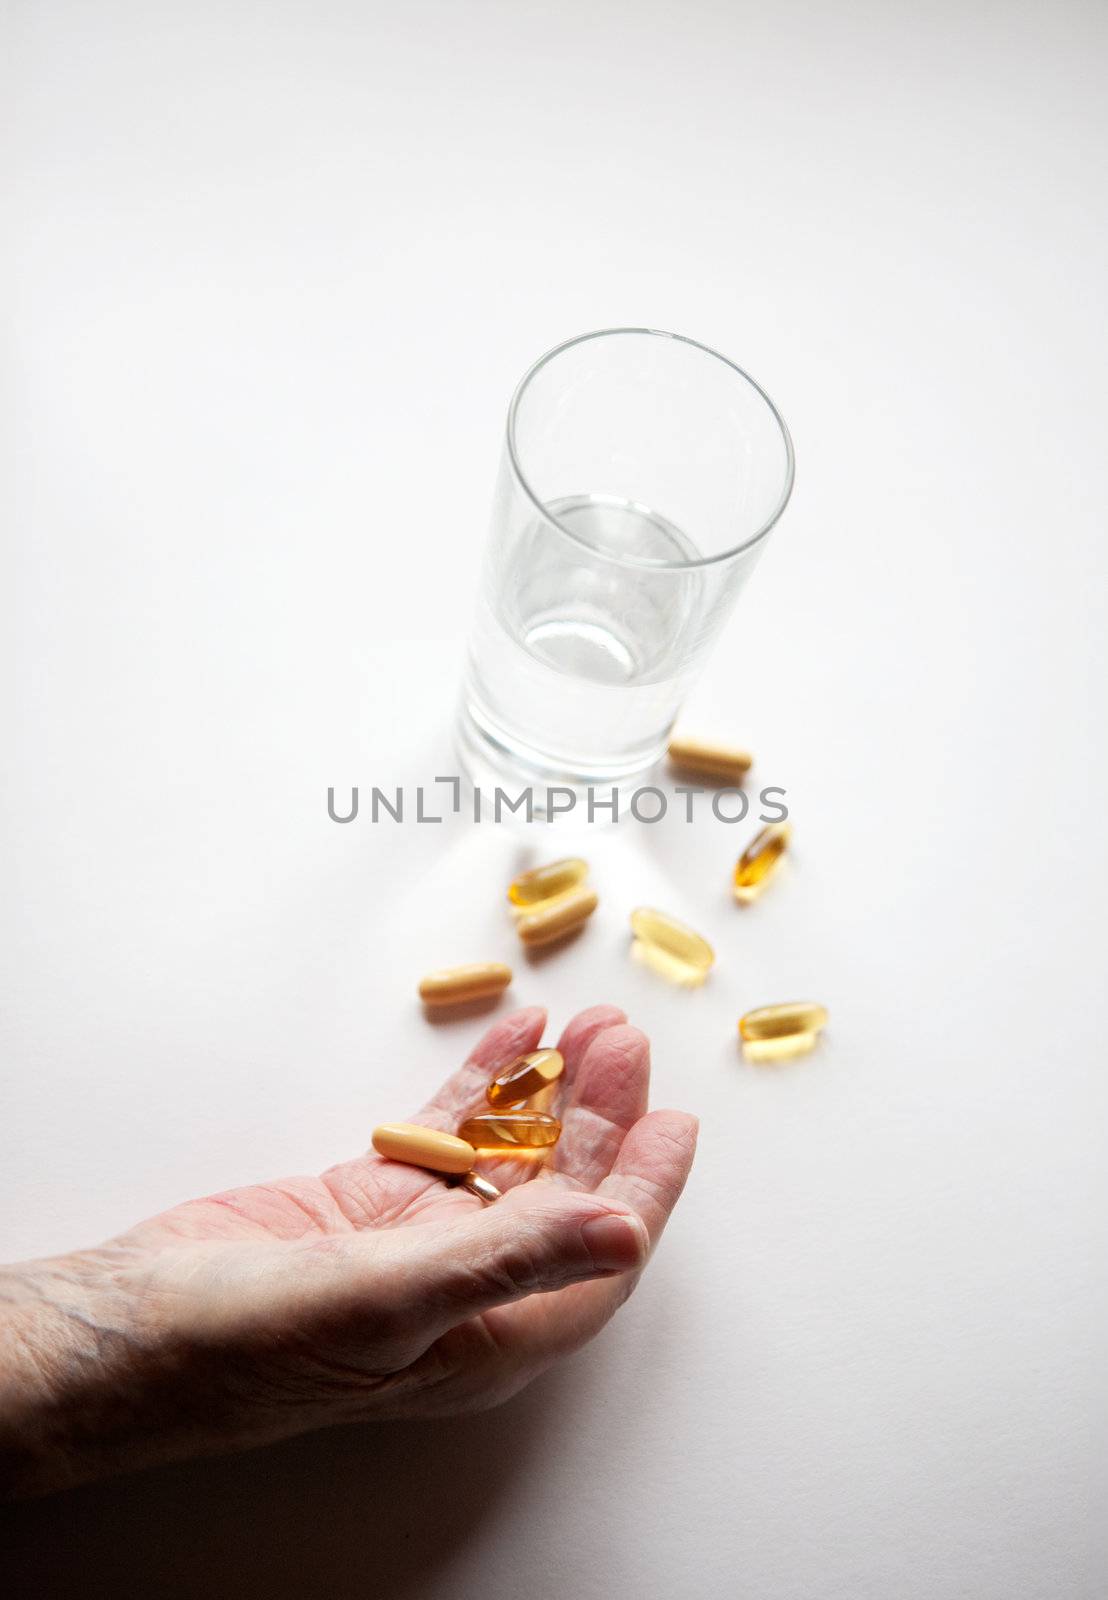 An elderly hand with a variety of large pills - shallow depth of field, focus on hand and pills